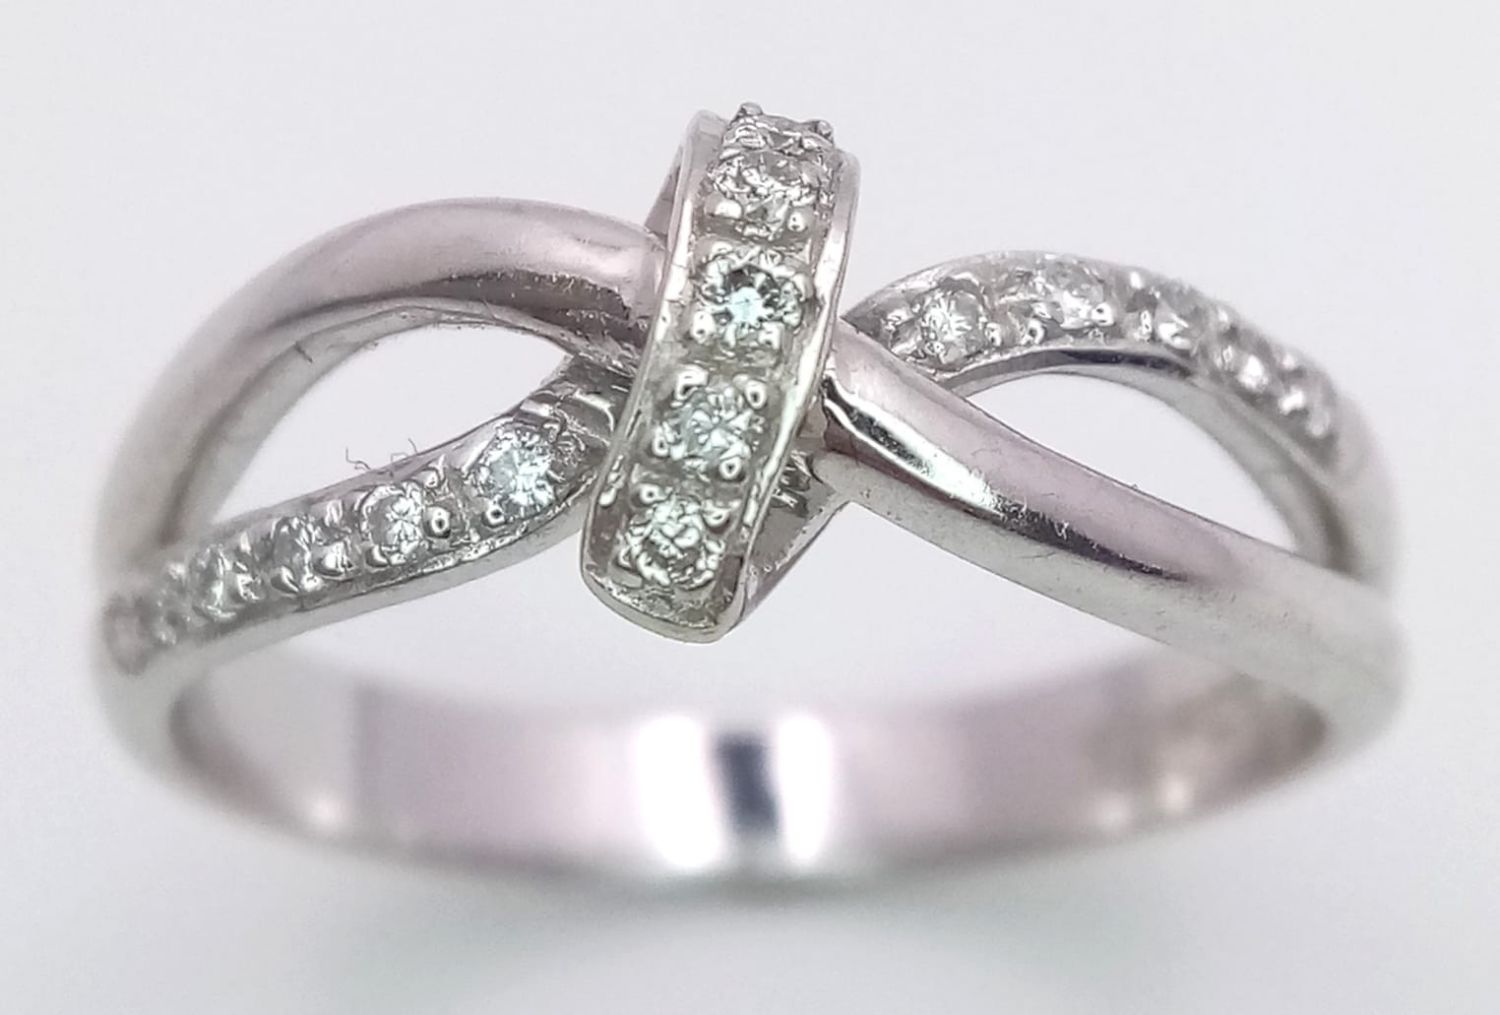 A FANCY 18K WHITE GOLD DIAMOND KNOTTED RING, APPROX 0.15CT DIAMONDS, WEIGHT 3.8G SIZE N - Image 5 of 8